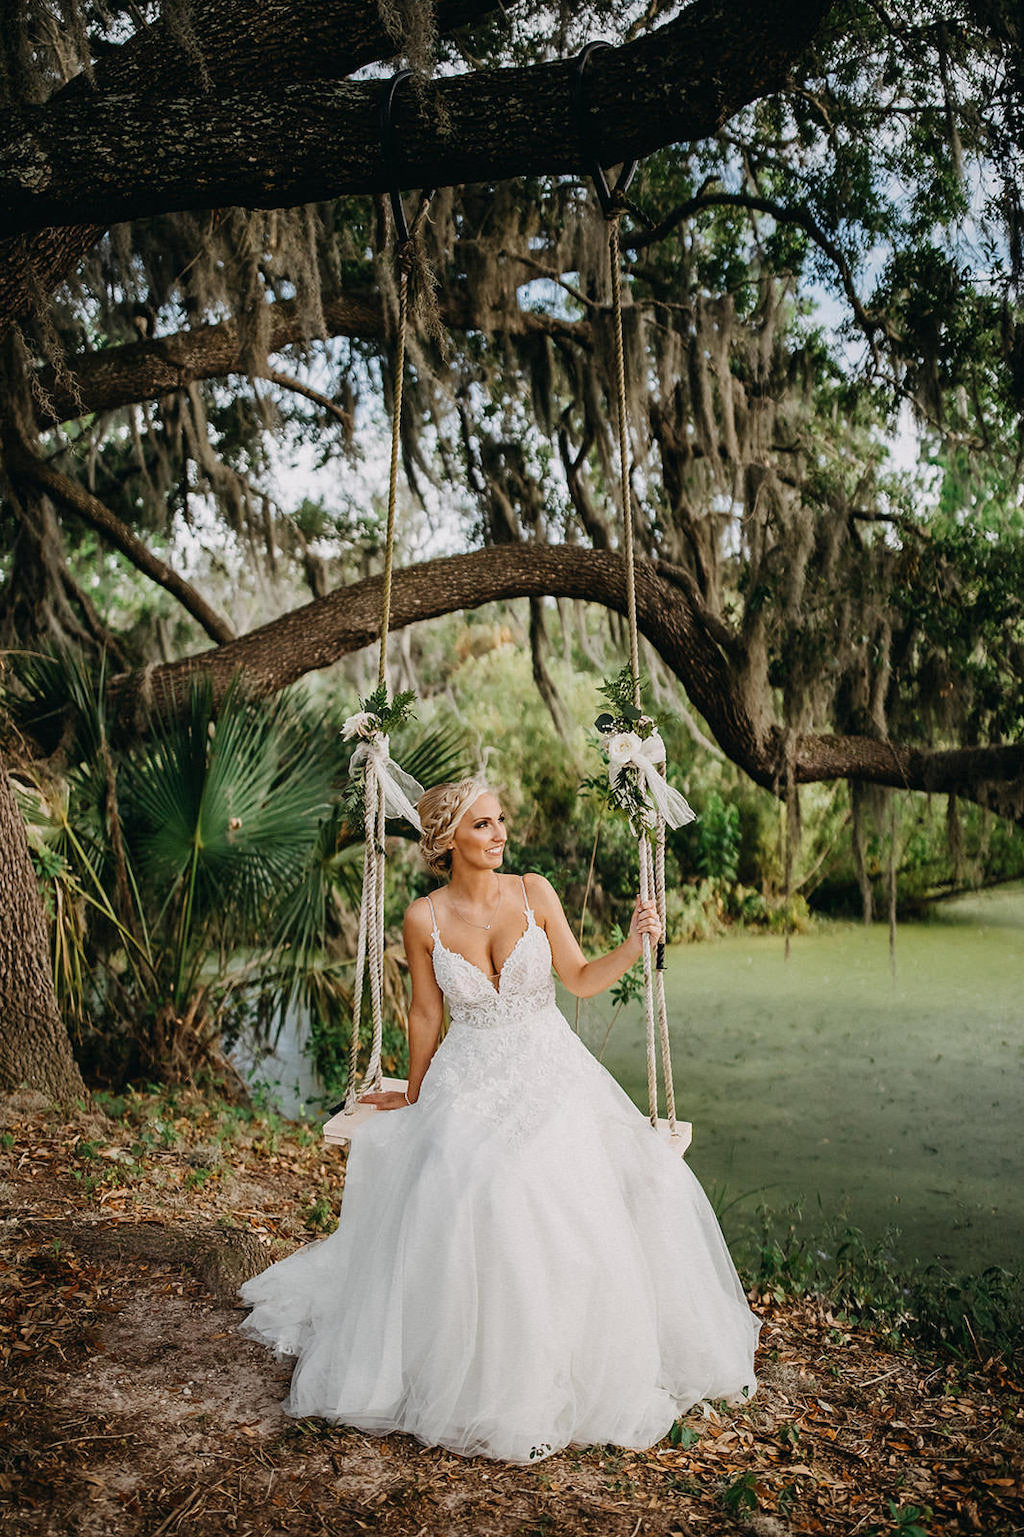 Florida Outdoor Rustic Inspired Wedding Portrait on Swing, Bride in Spaghetti Strap V Neck Lace A Line Wedding Dress with Braided Updo | Lakeland Rustic Wedding Venue The Prairie Glenn Barn at Gable Oaks Ranch